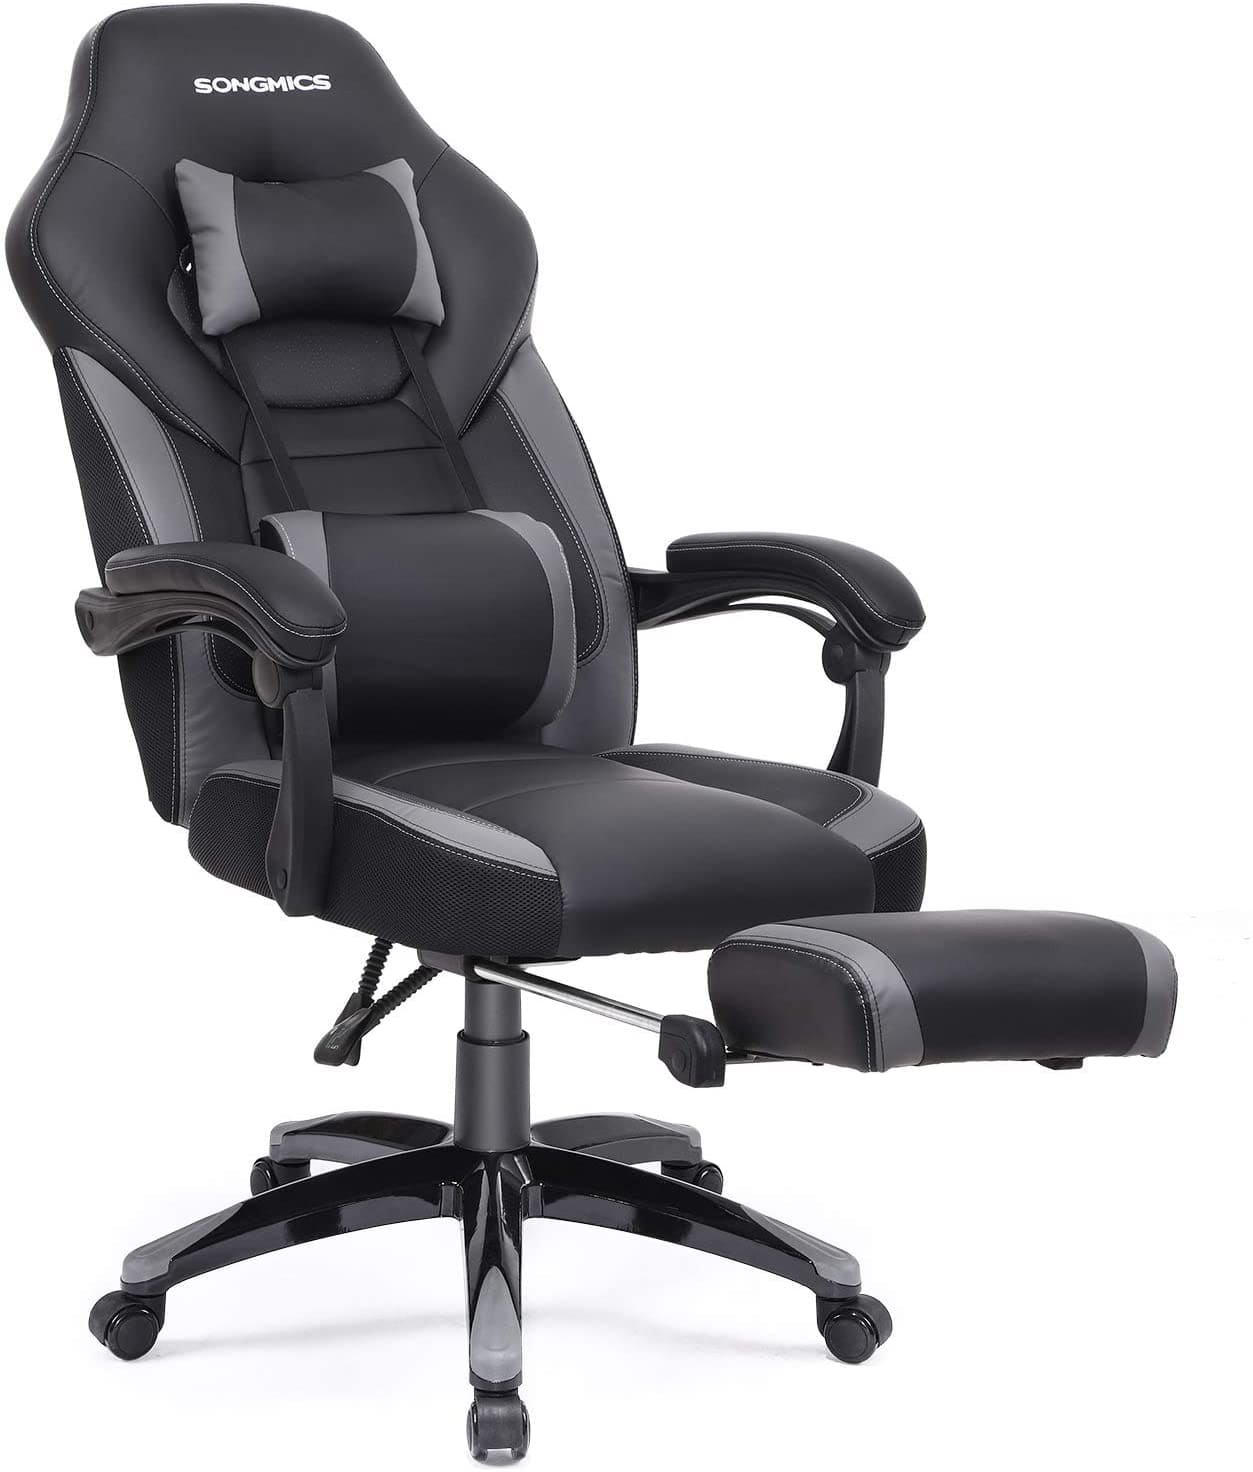 racing desk chair with footrest